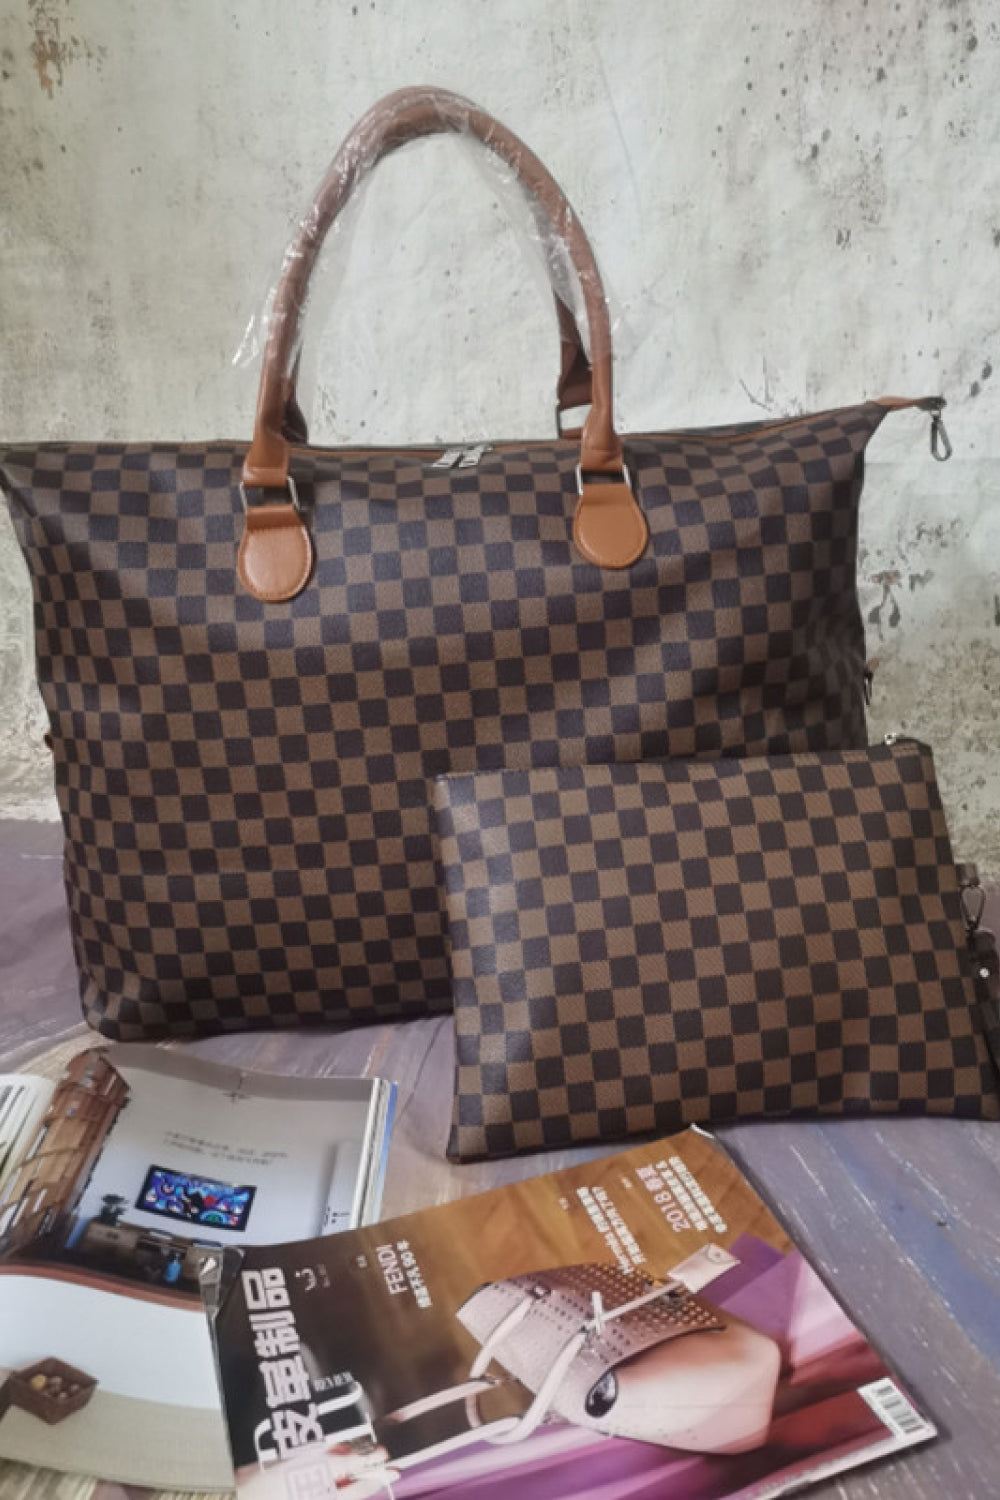 Load image into Gallery viewer, Checkered Two-Piece Bag Set
